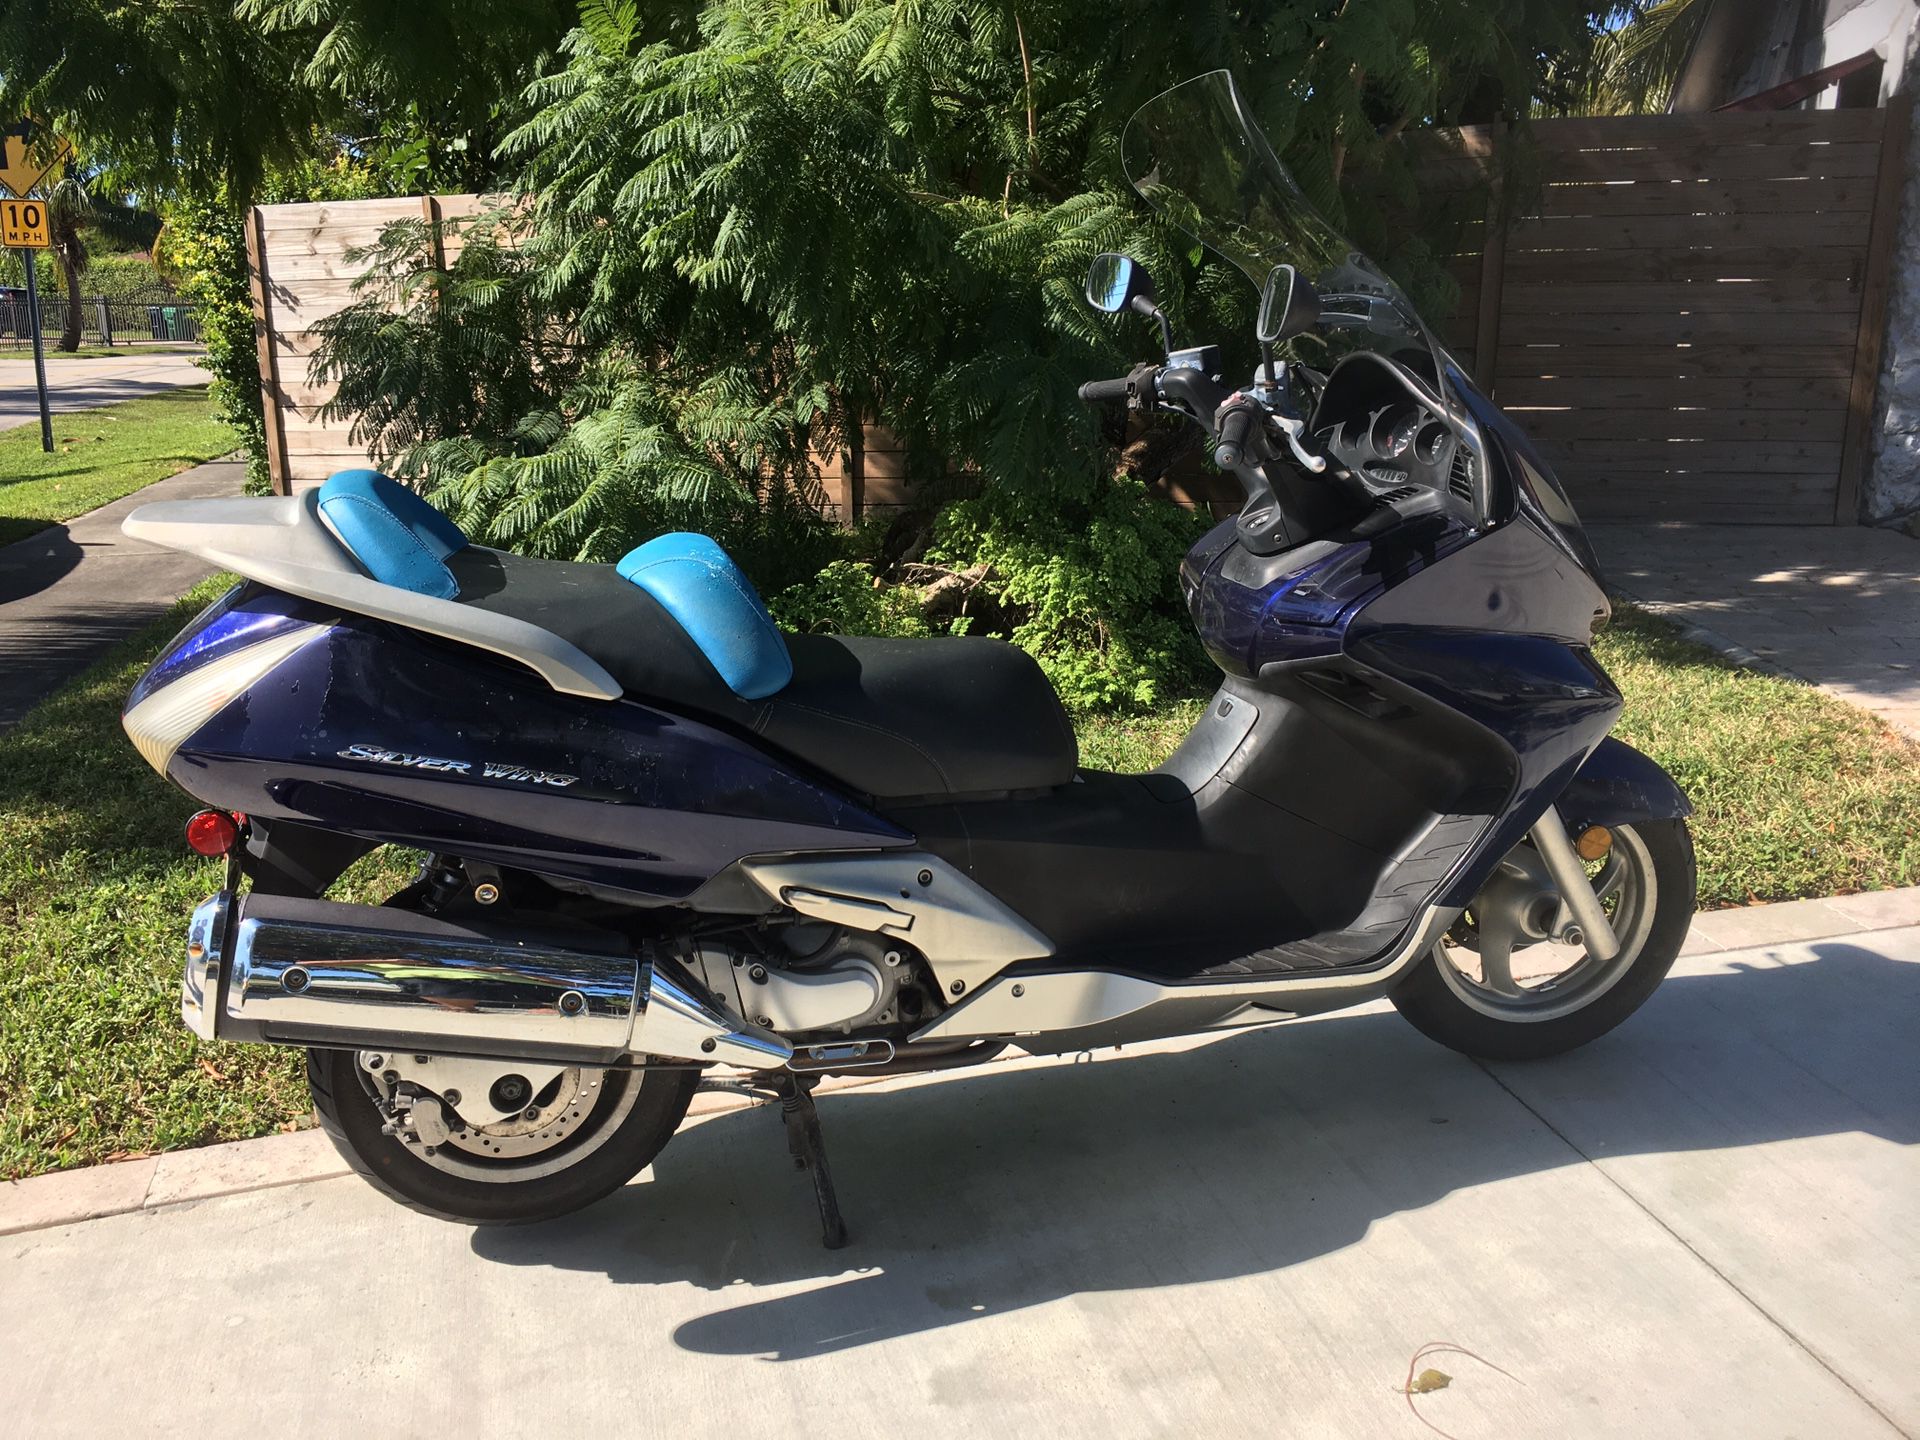 [HONDA SCOOTER SALE] MUST SEE!!! 2006 Honda SilverWing (ONLY 12,000 Miles)